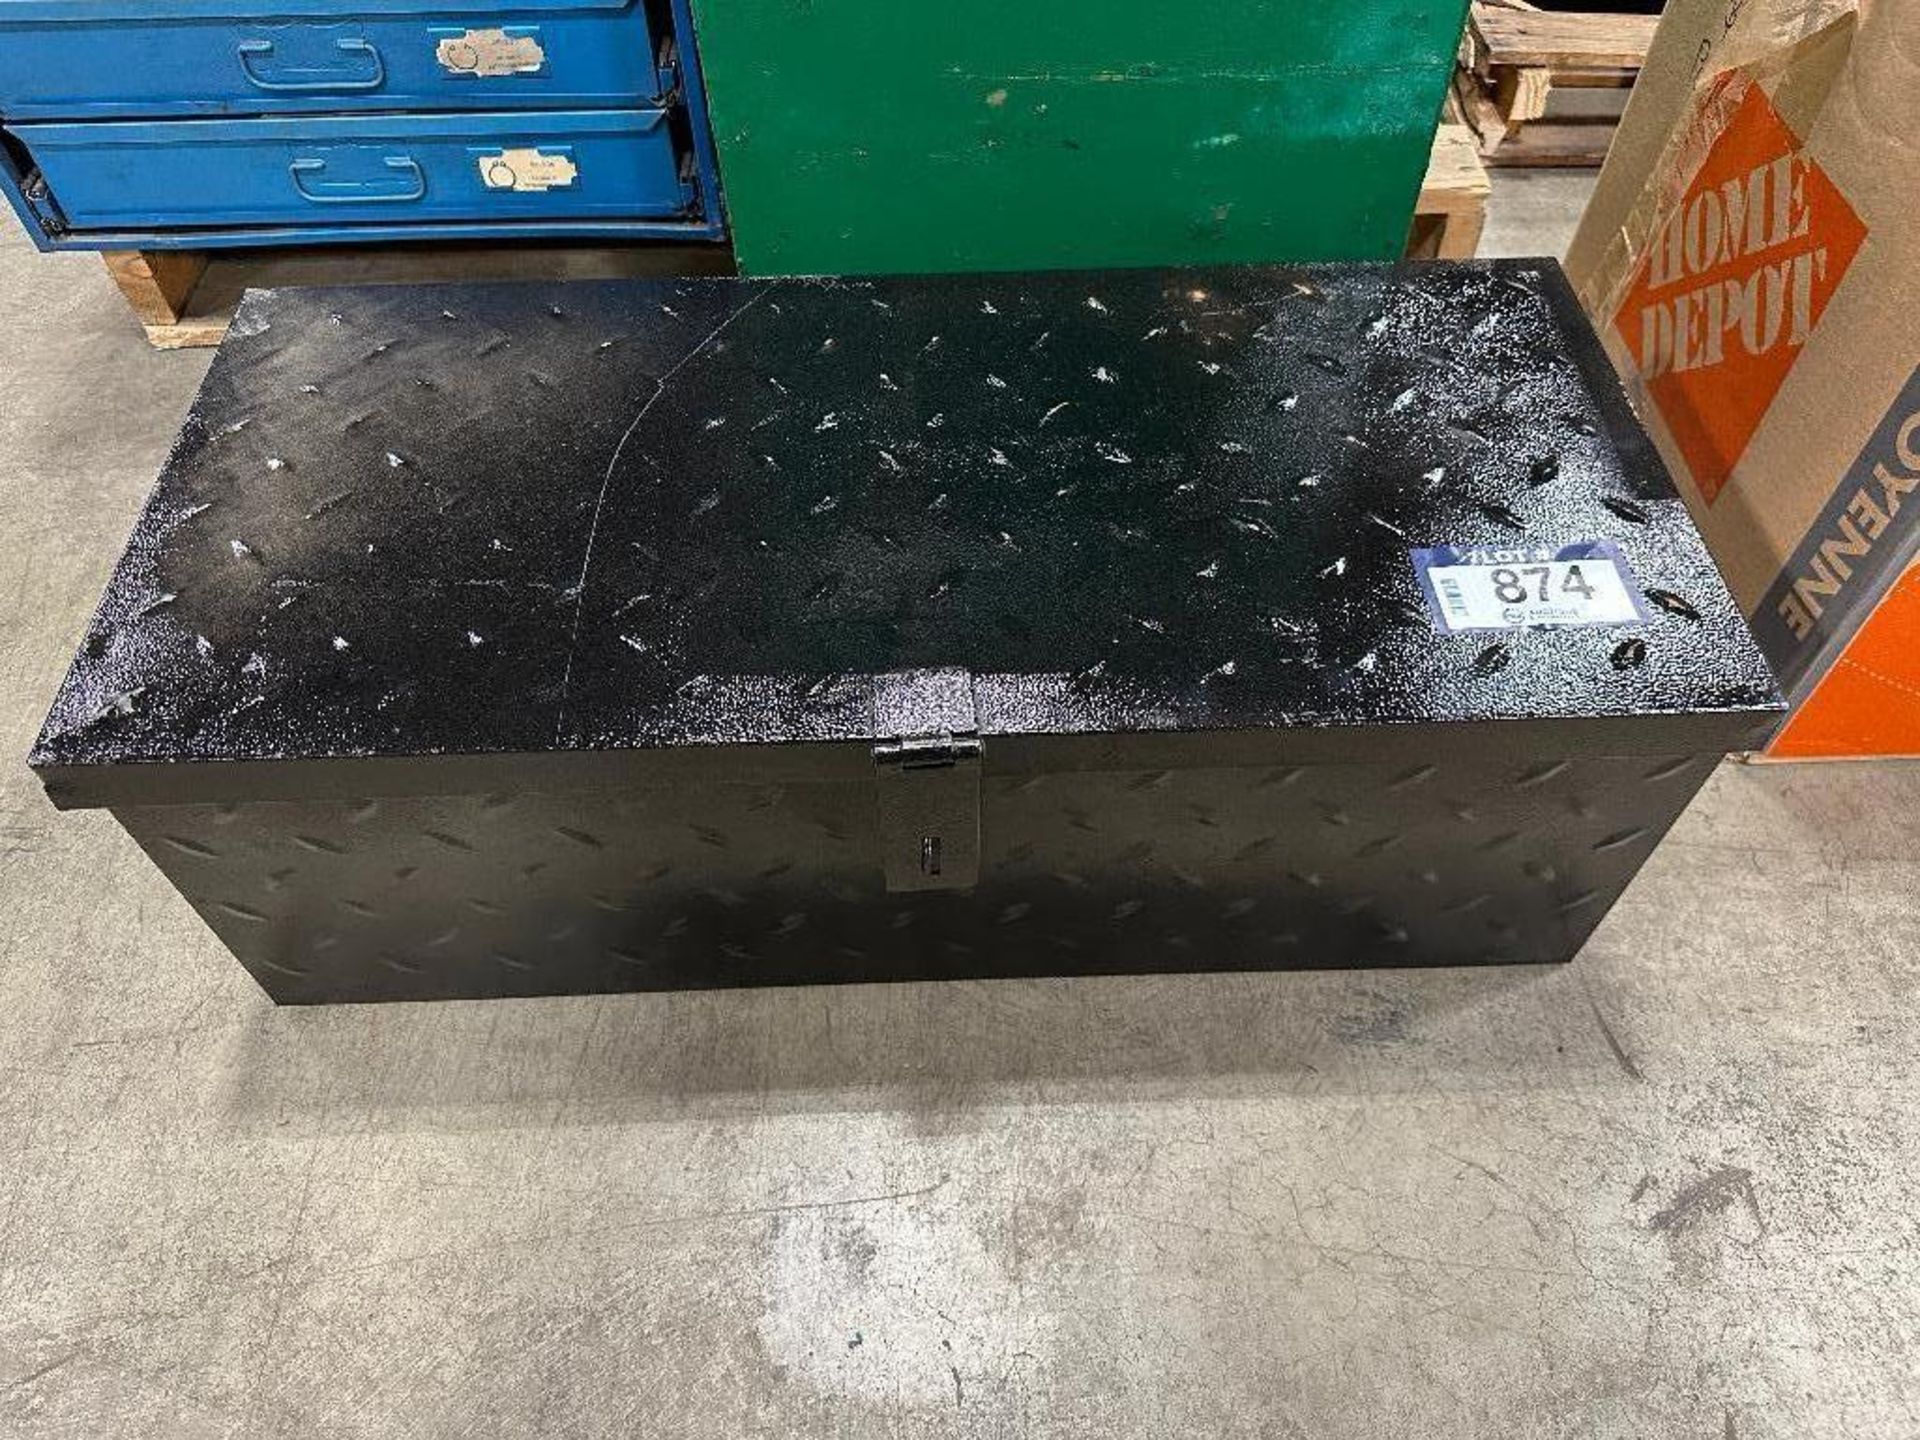 Approx. 30" X 15" X 10" Metal Tool Chest